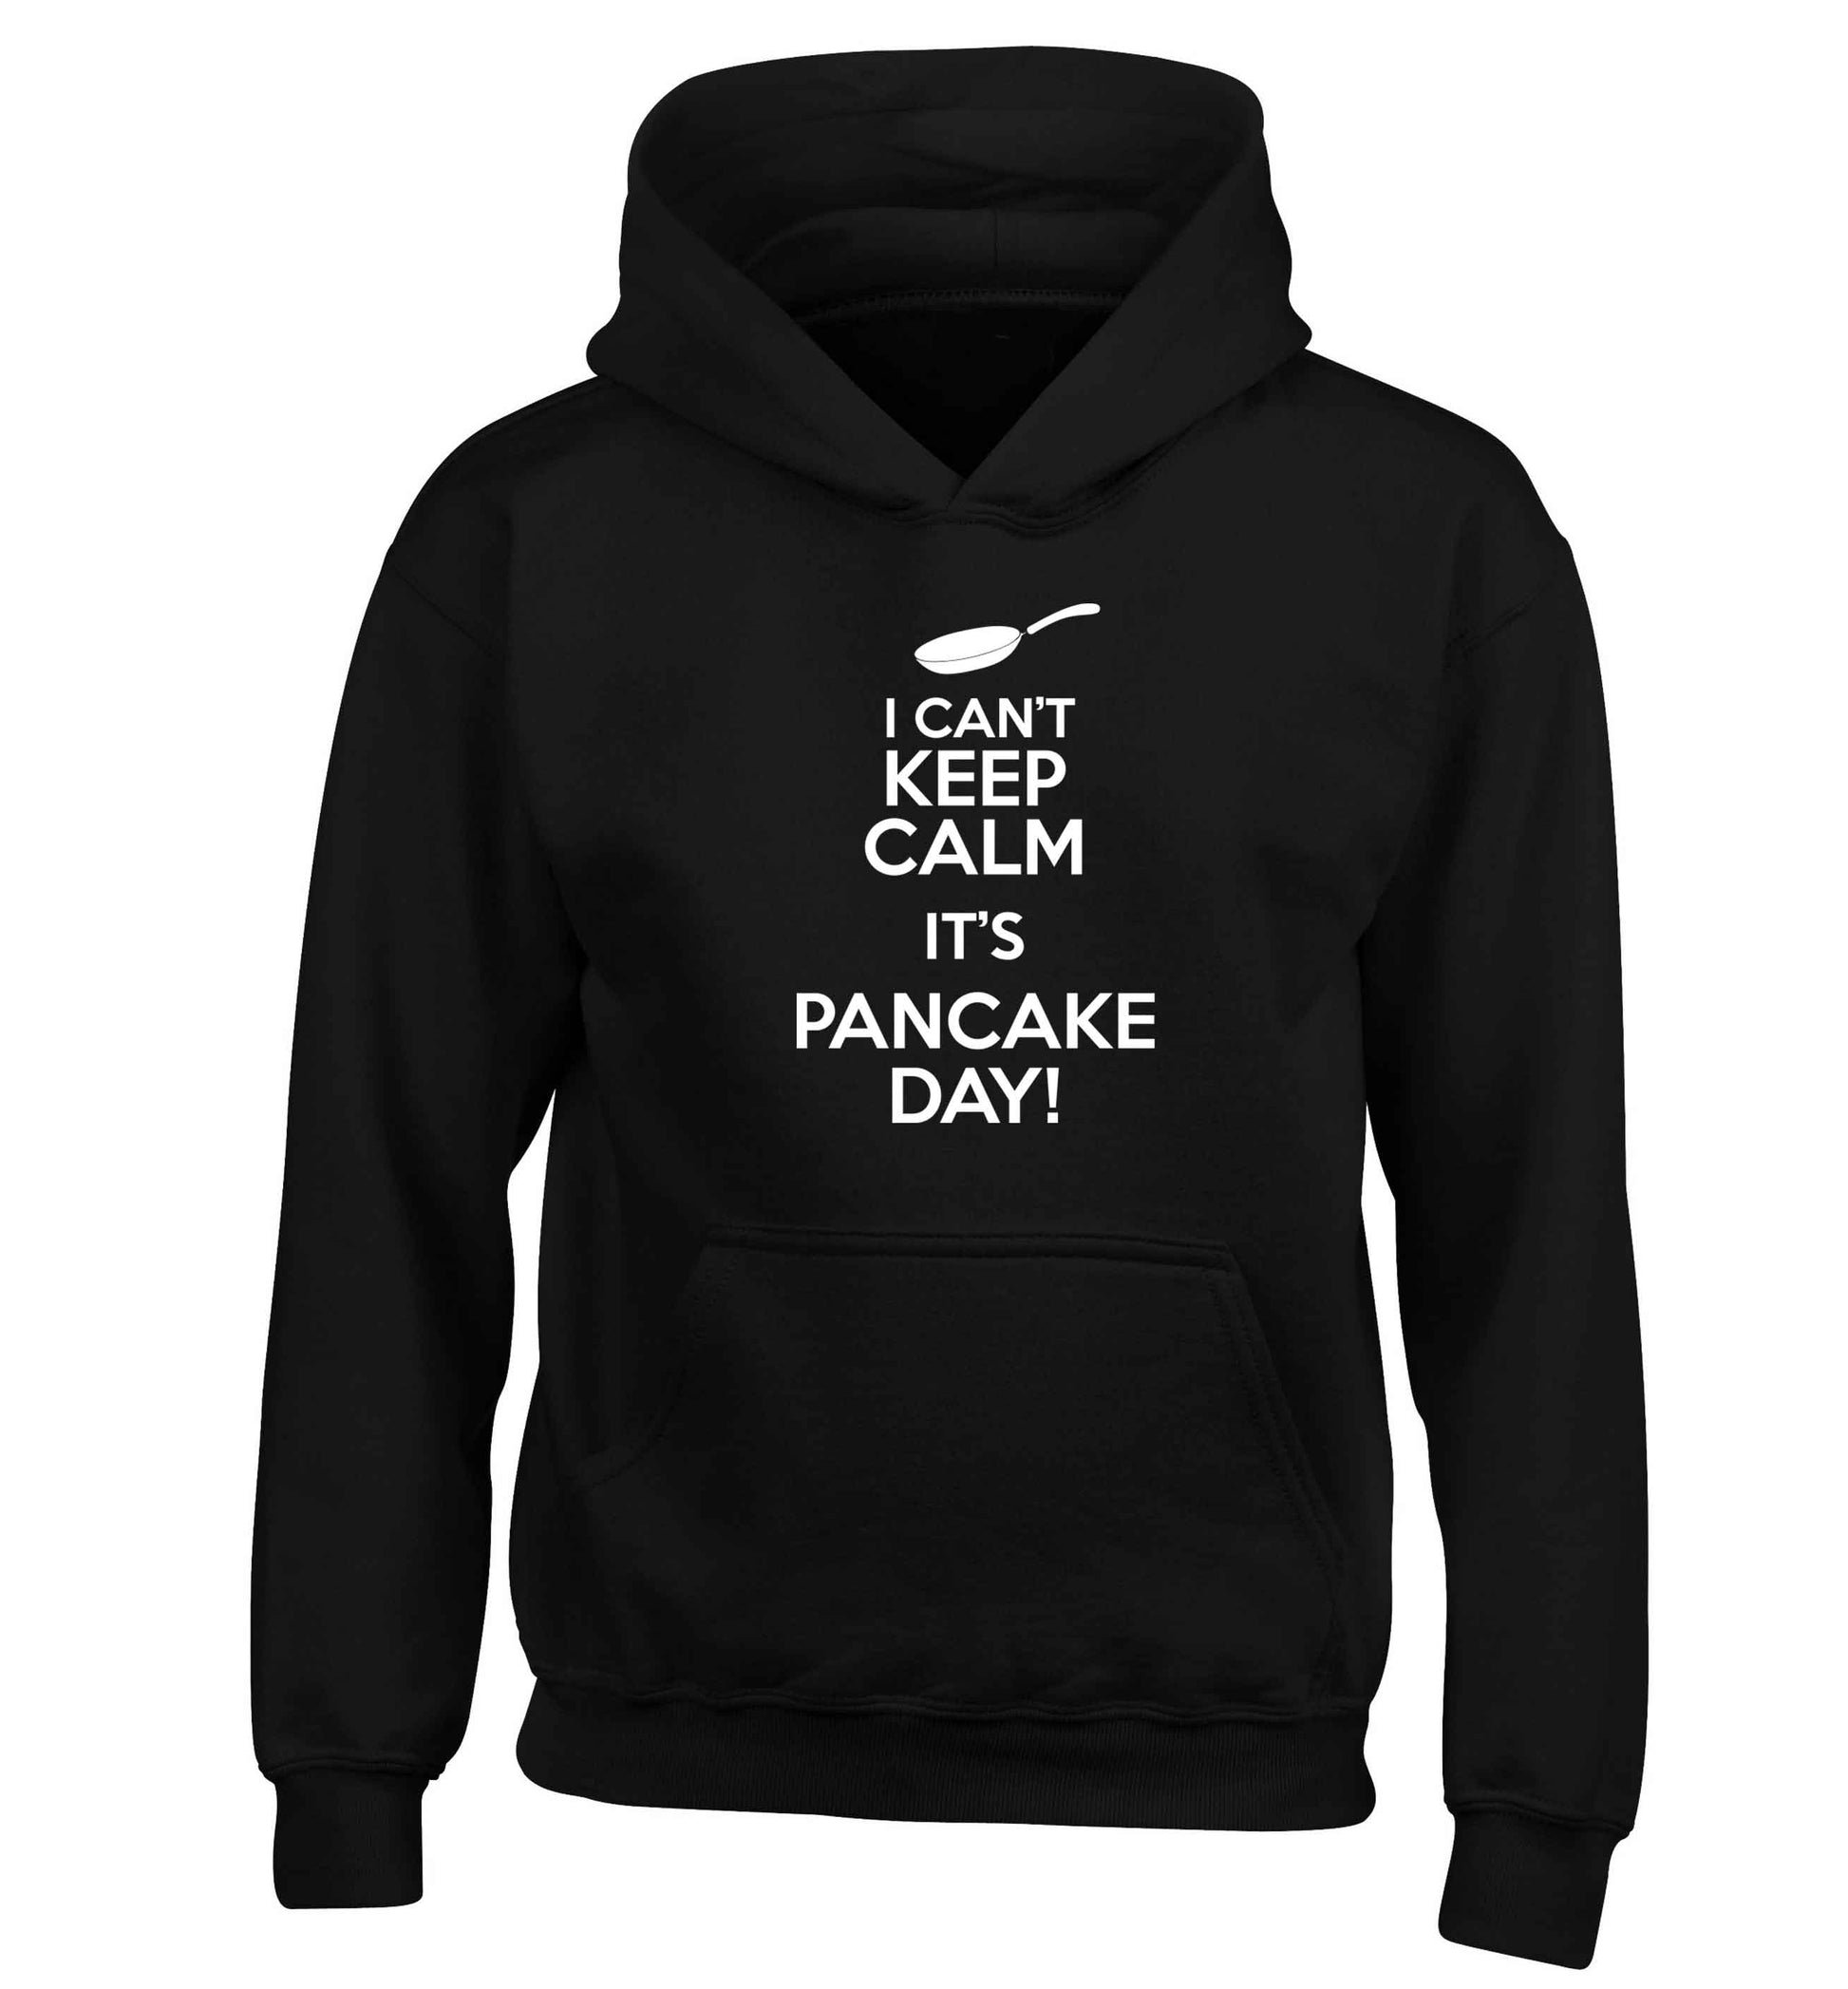 I can't keep calm it's pancake day! children's black hoodie 12-13 Years